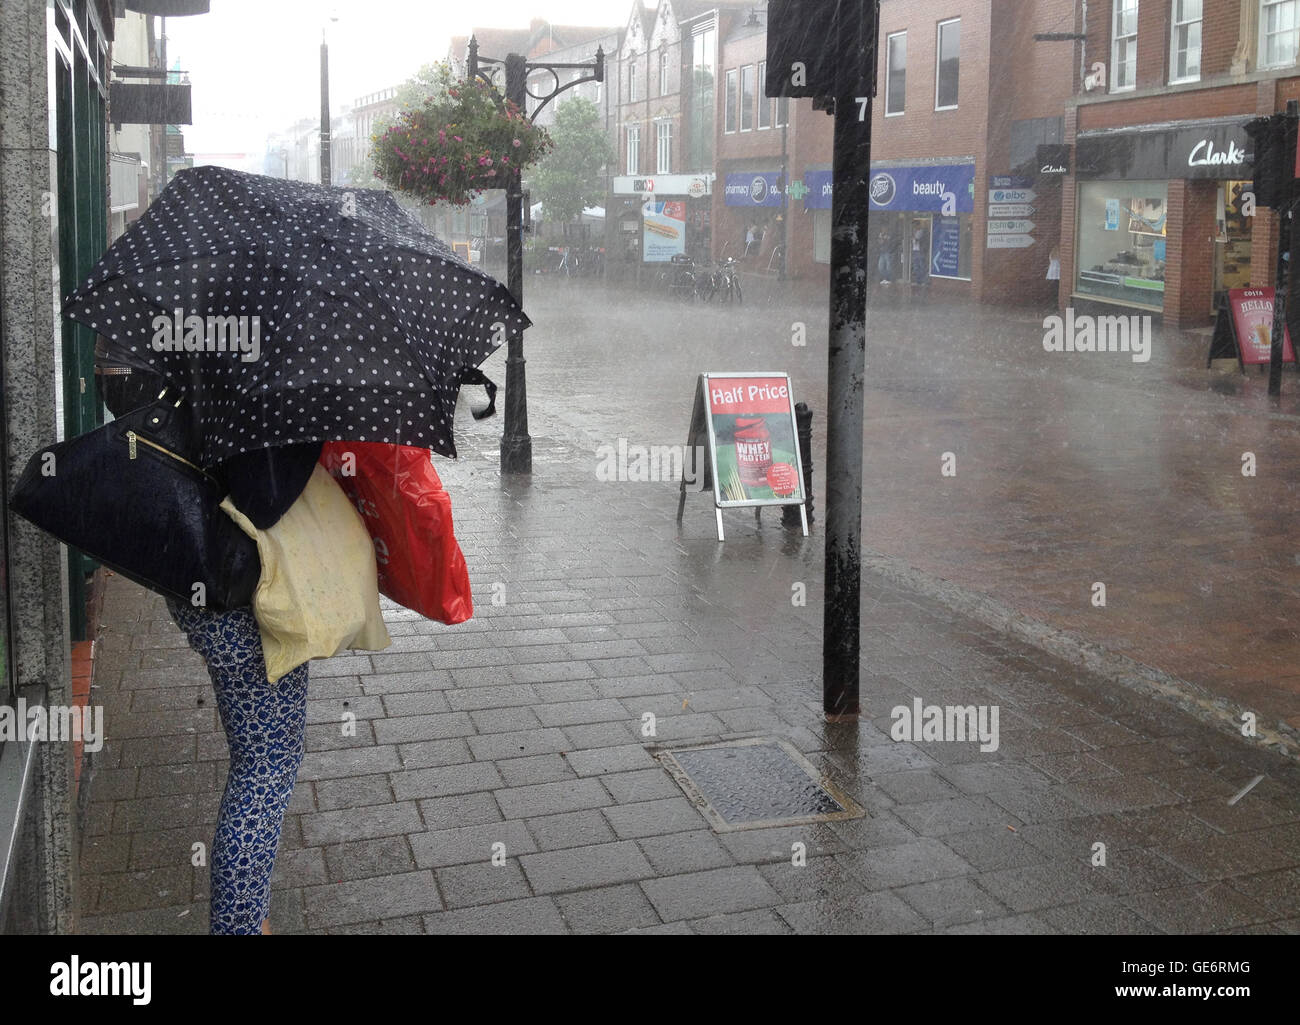 A woman trying to shelter herself and her shopping bags from torrential rain with a small umbrella in the town of Newbury, Berkshire, UK Stock Photo